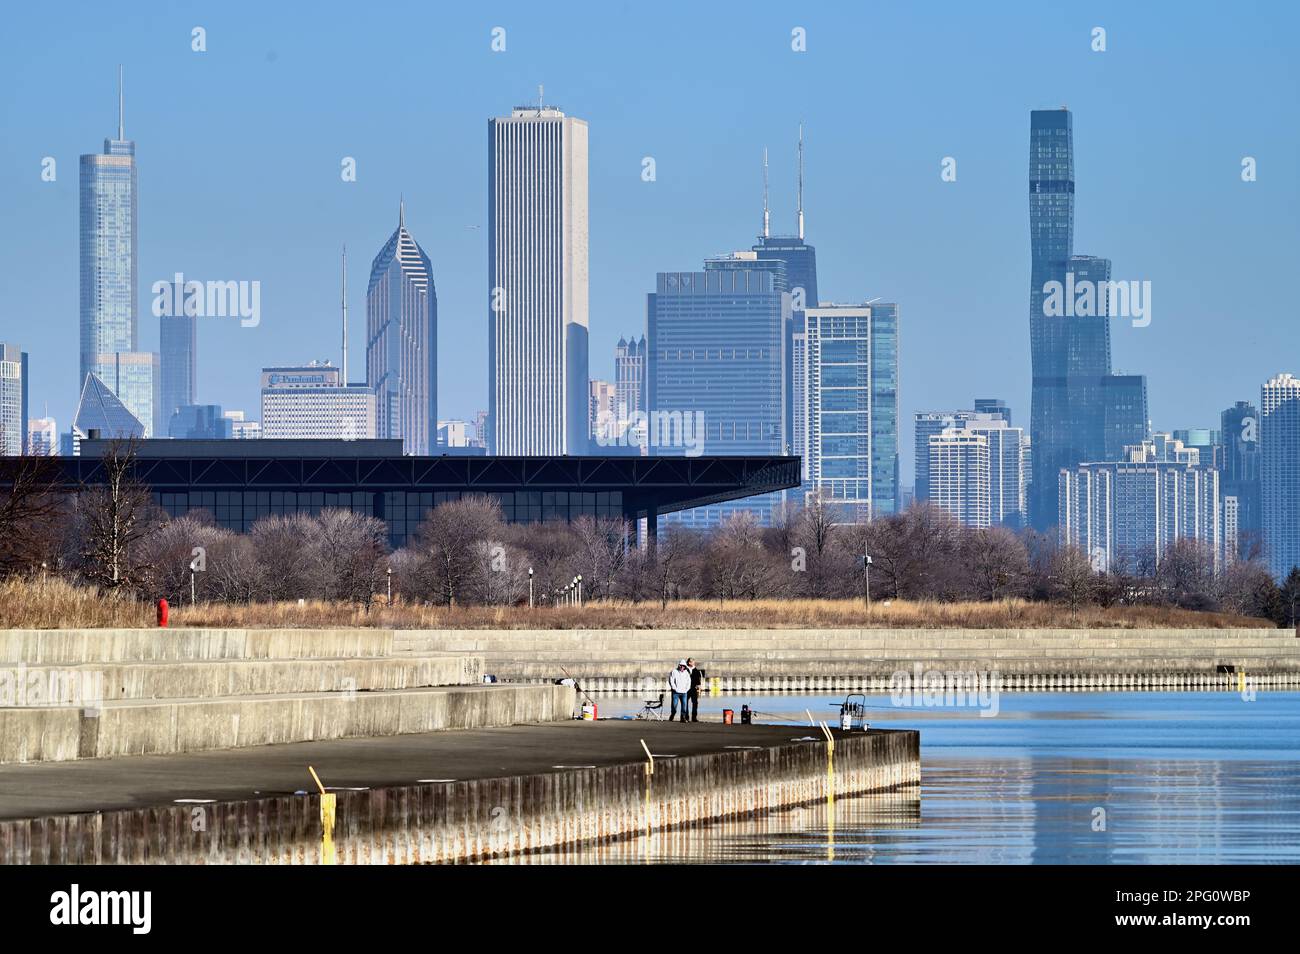 Chicago, Illinois, USA. The city skyline beyond the waters of Lake Michigan near Chicago's 31st Street Harbor. Stock Photo